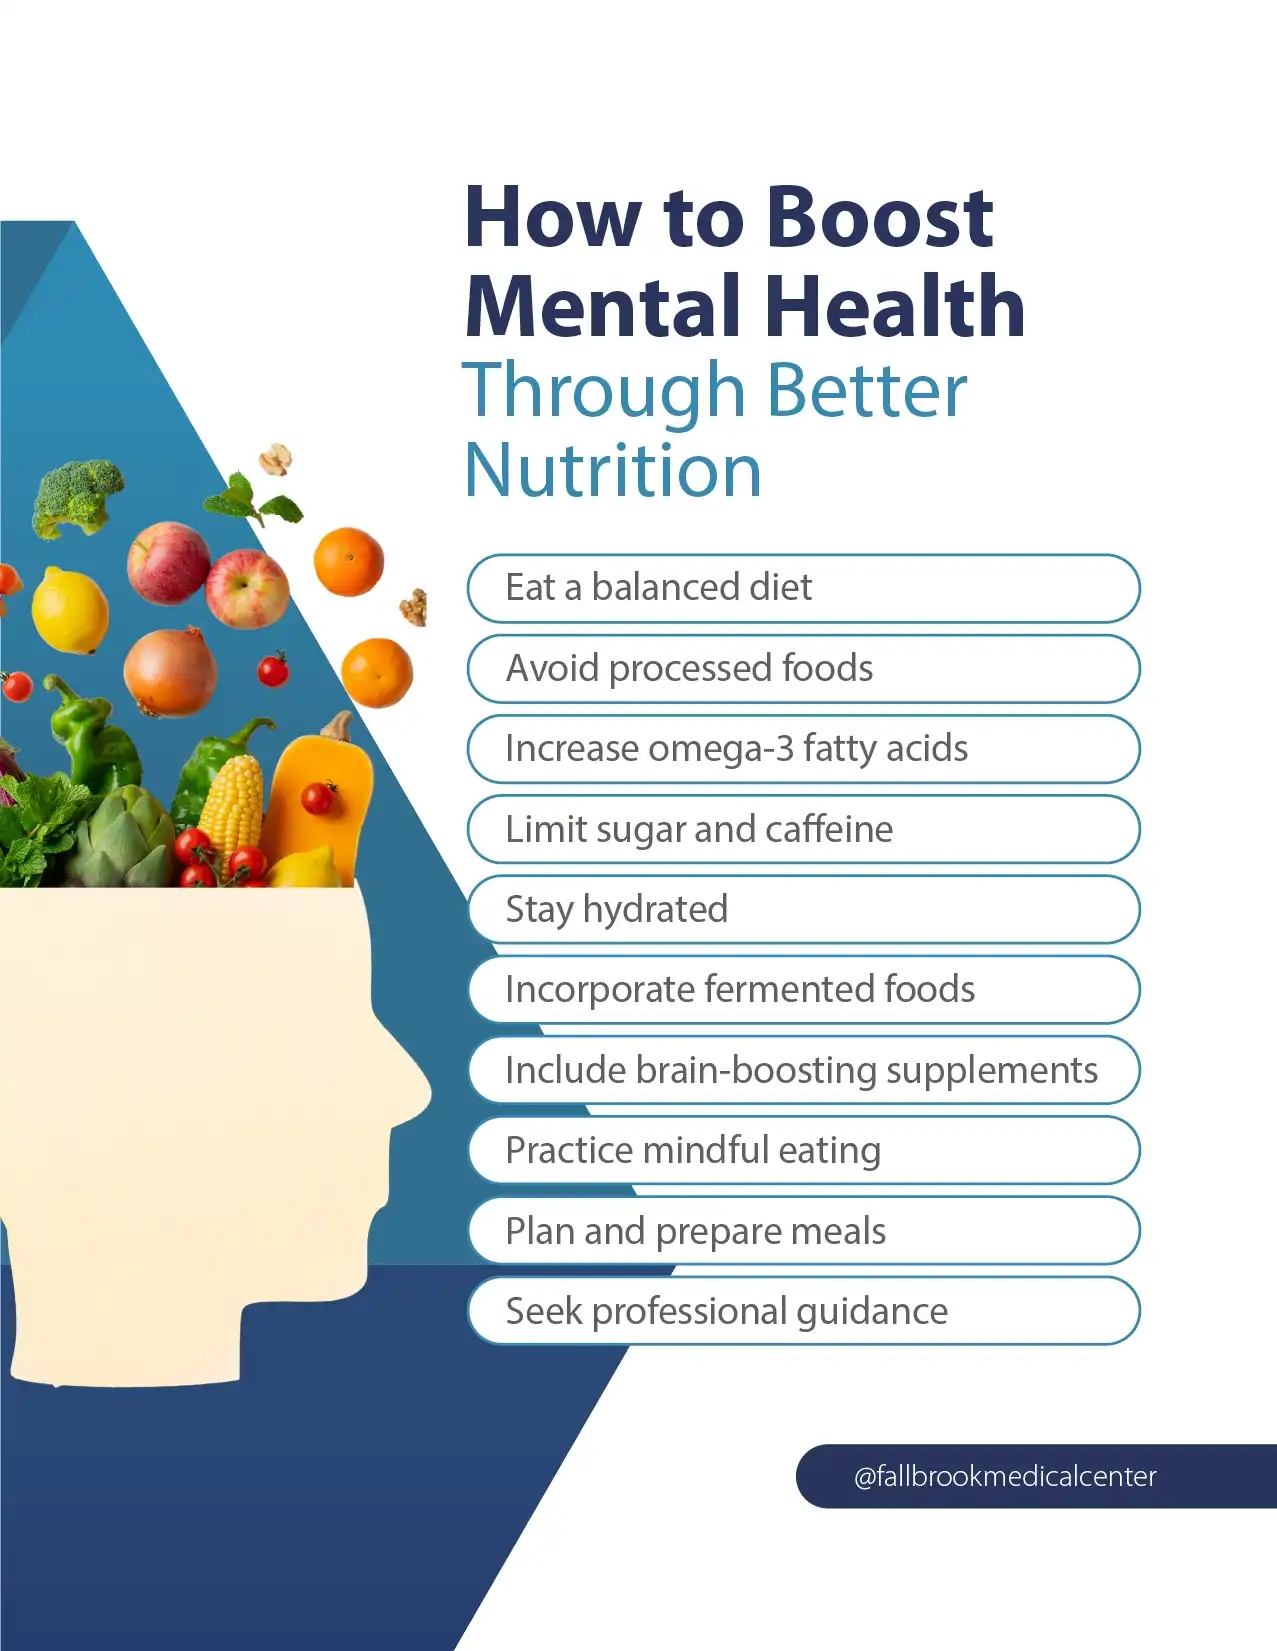 How to Boost Mental Health Through Better Nutrition